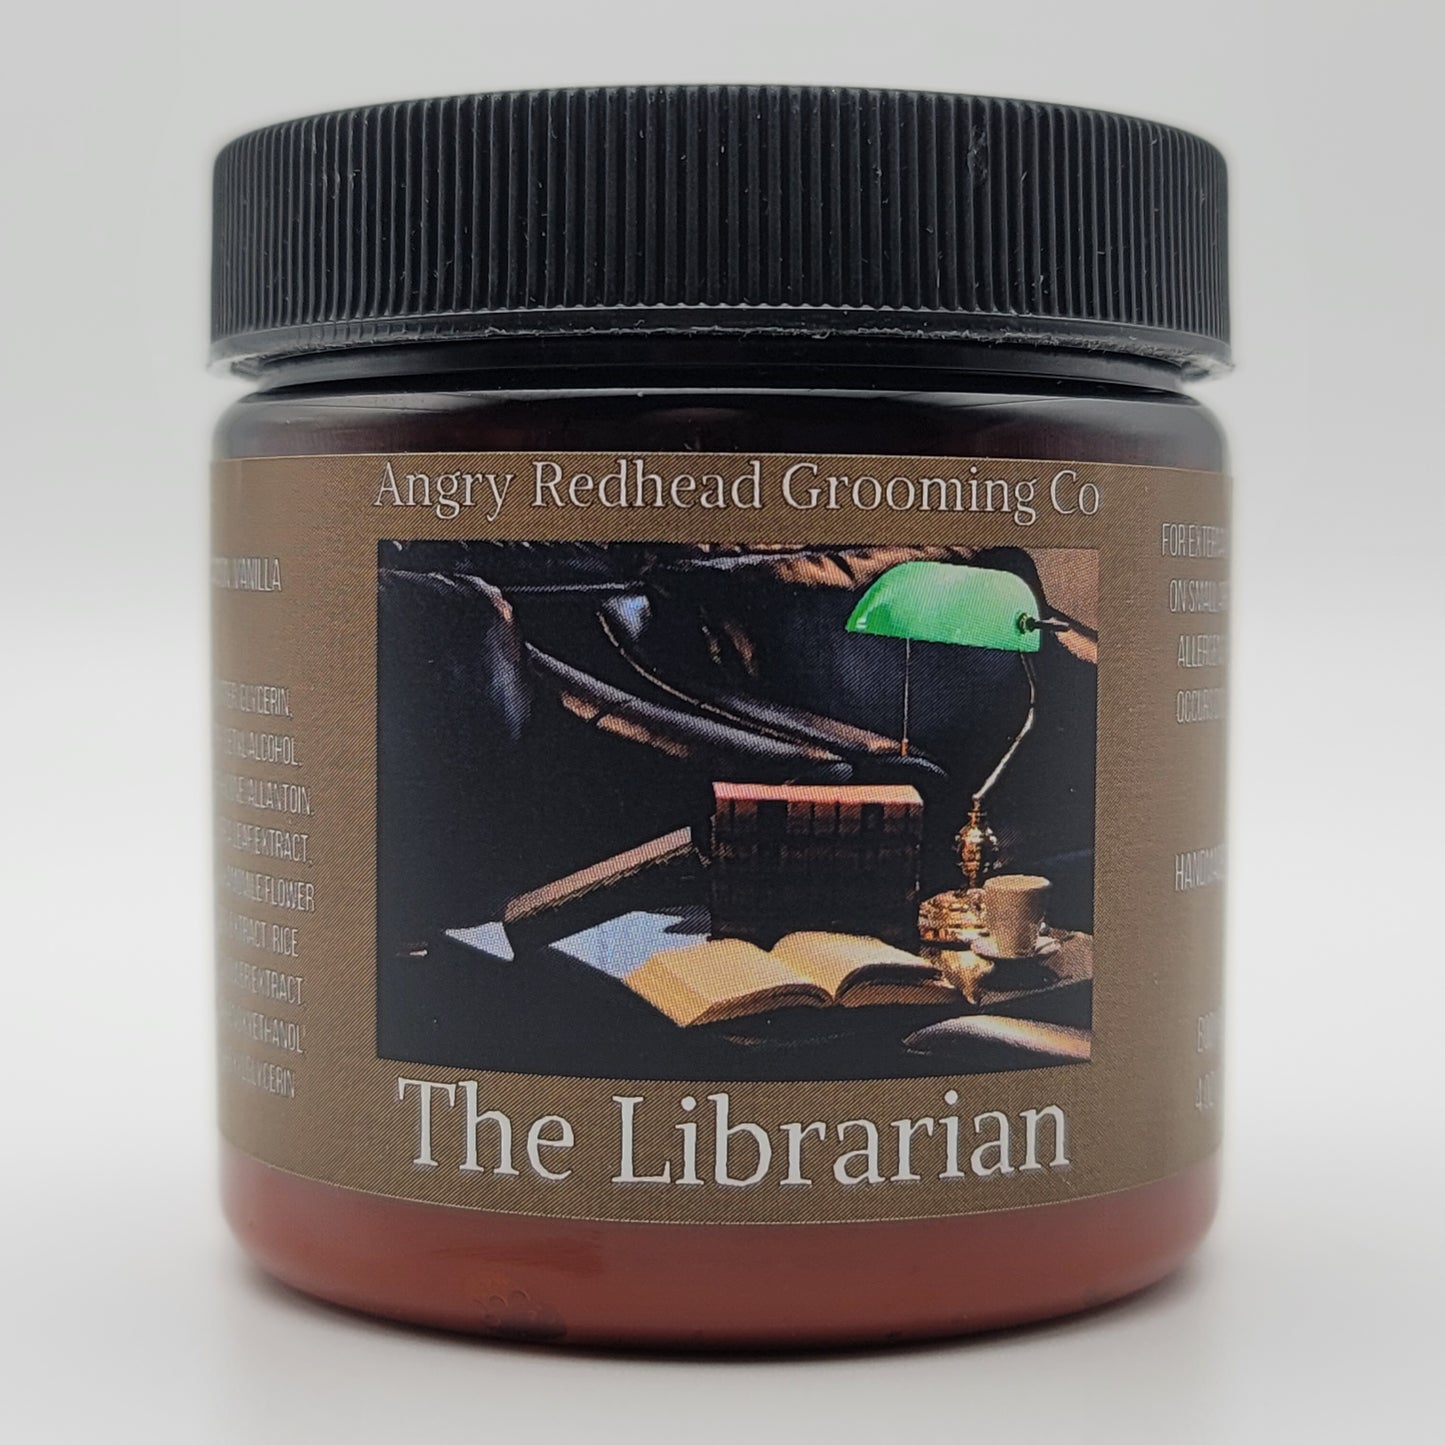 The Librarian Whipped Body Butter by Angry Redhead Grooming Co - angryredheadgrooming.com